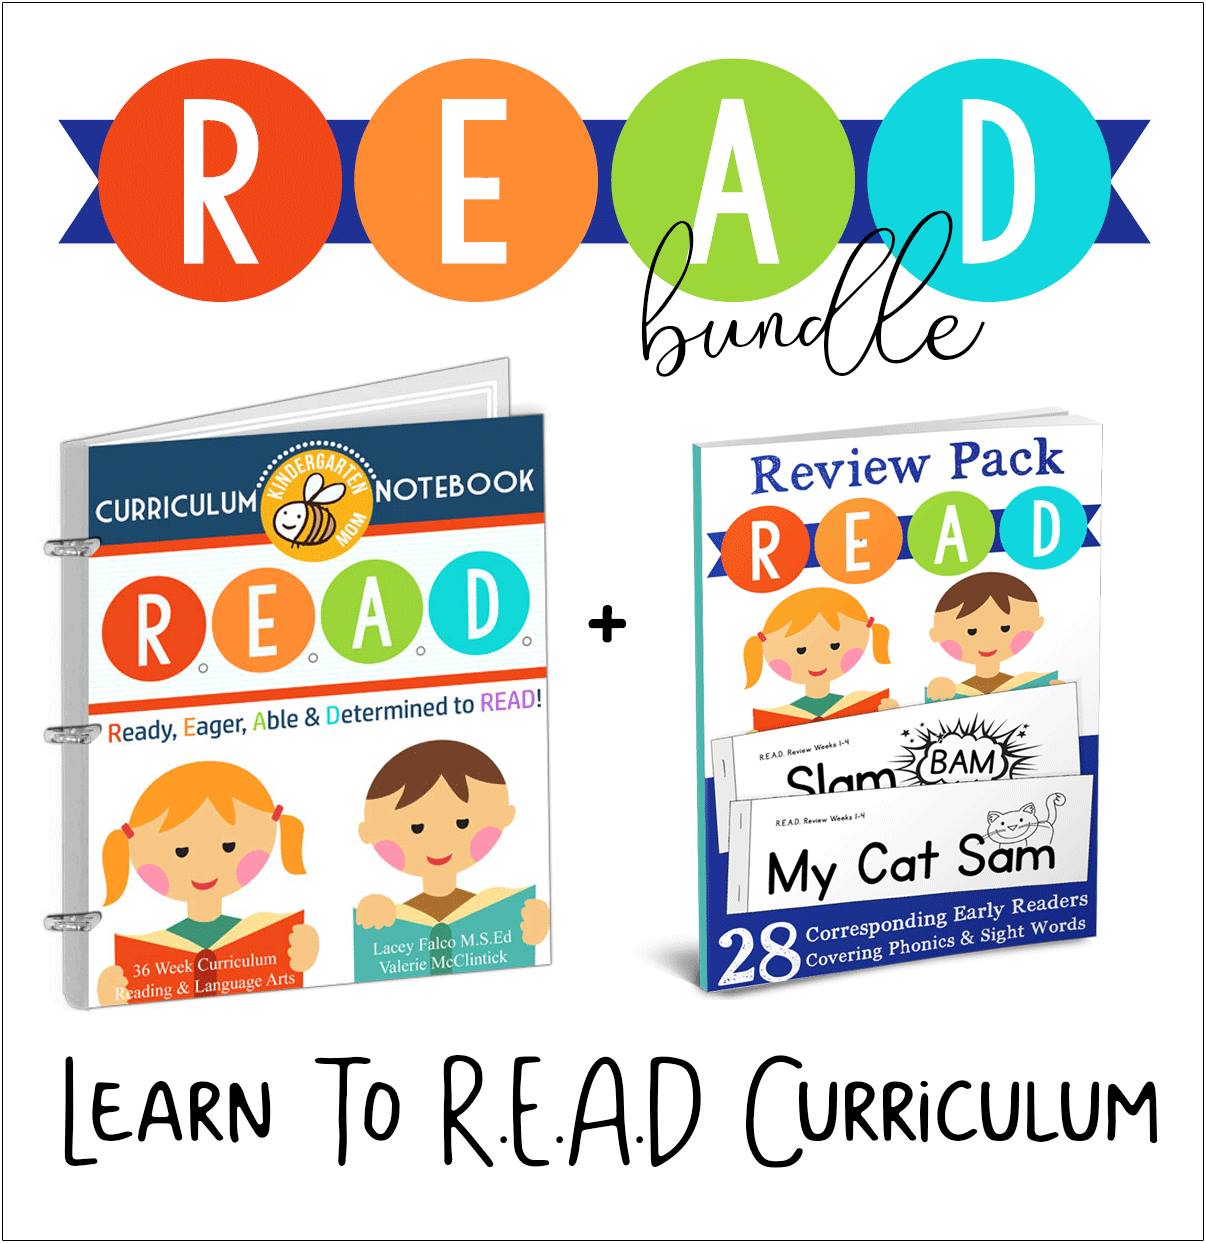 READ Bundle giveaway from Crafty Classroom